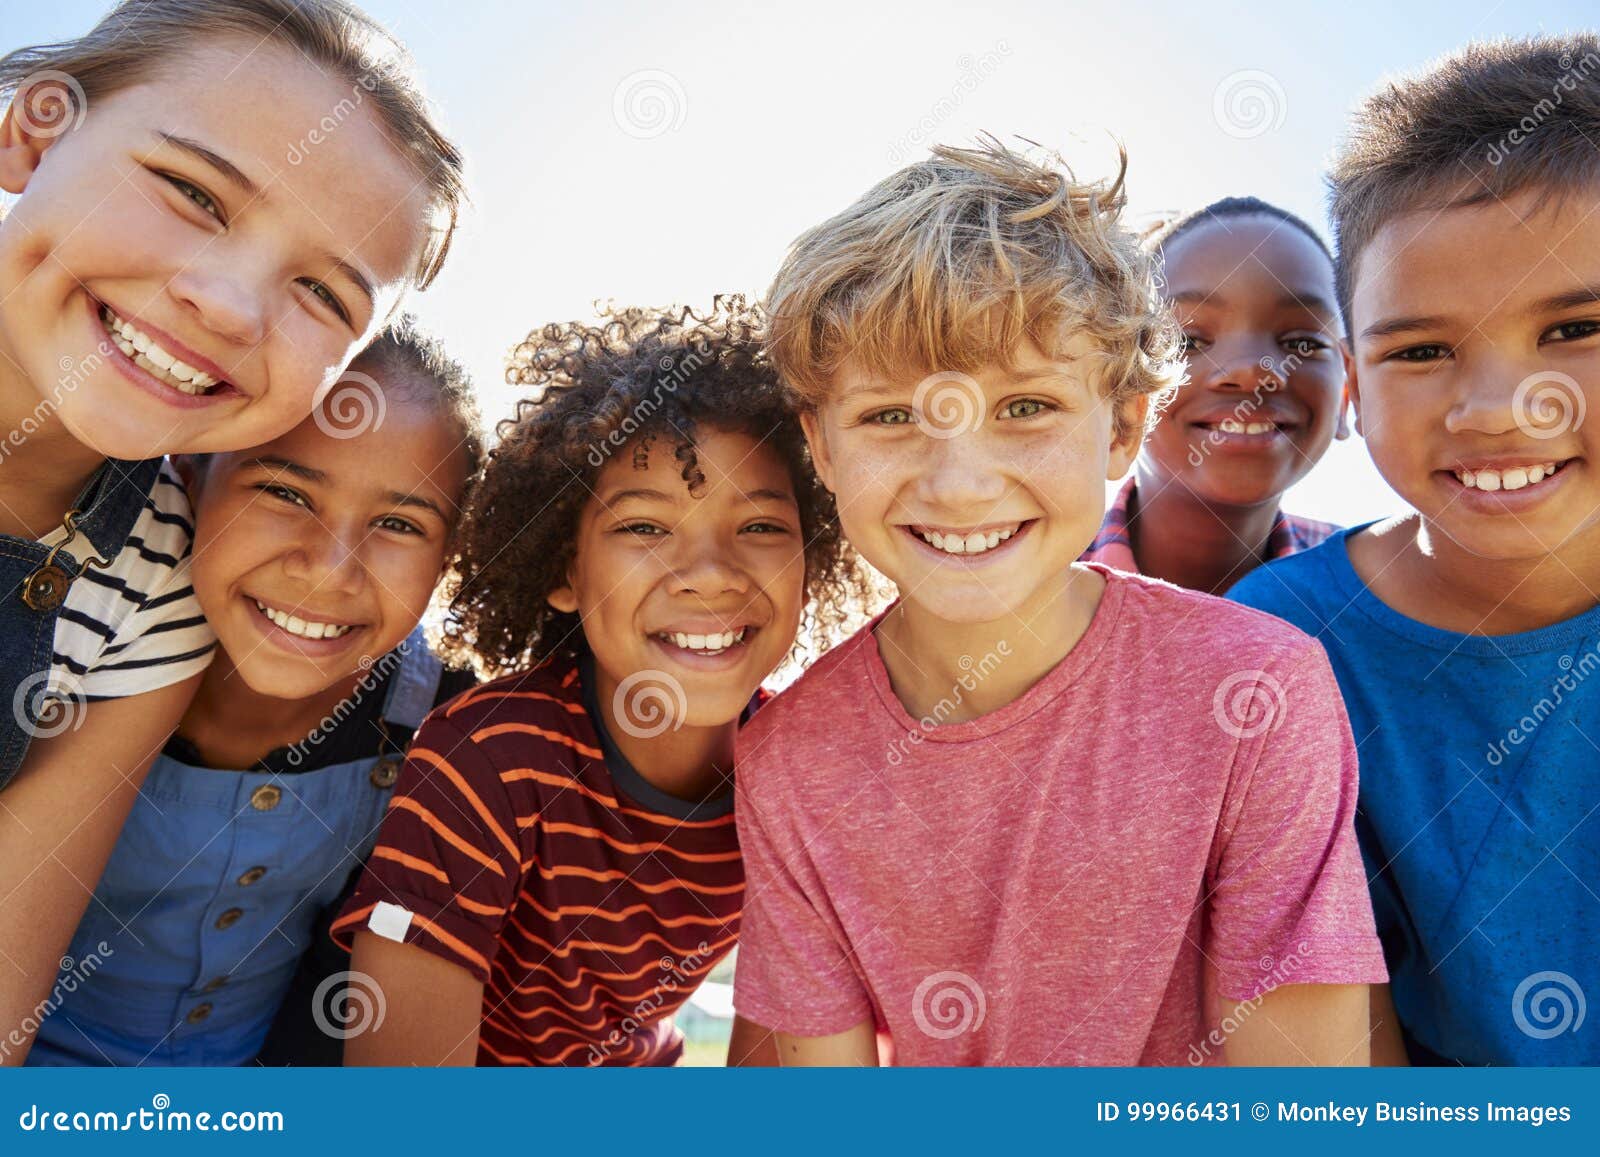 close up of pre-teen friends in a park smiling to camera